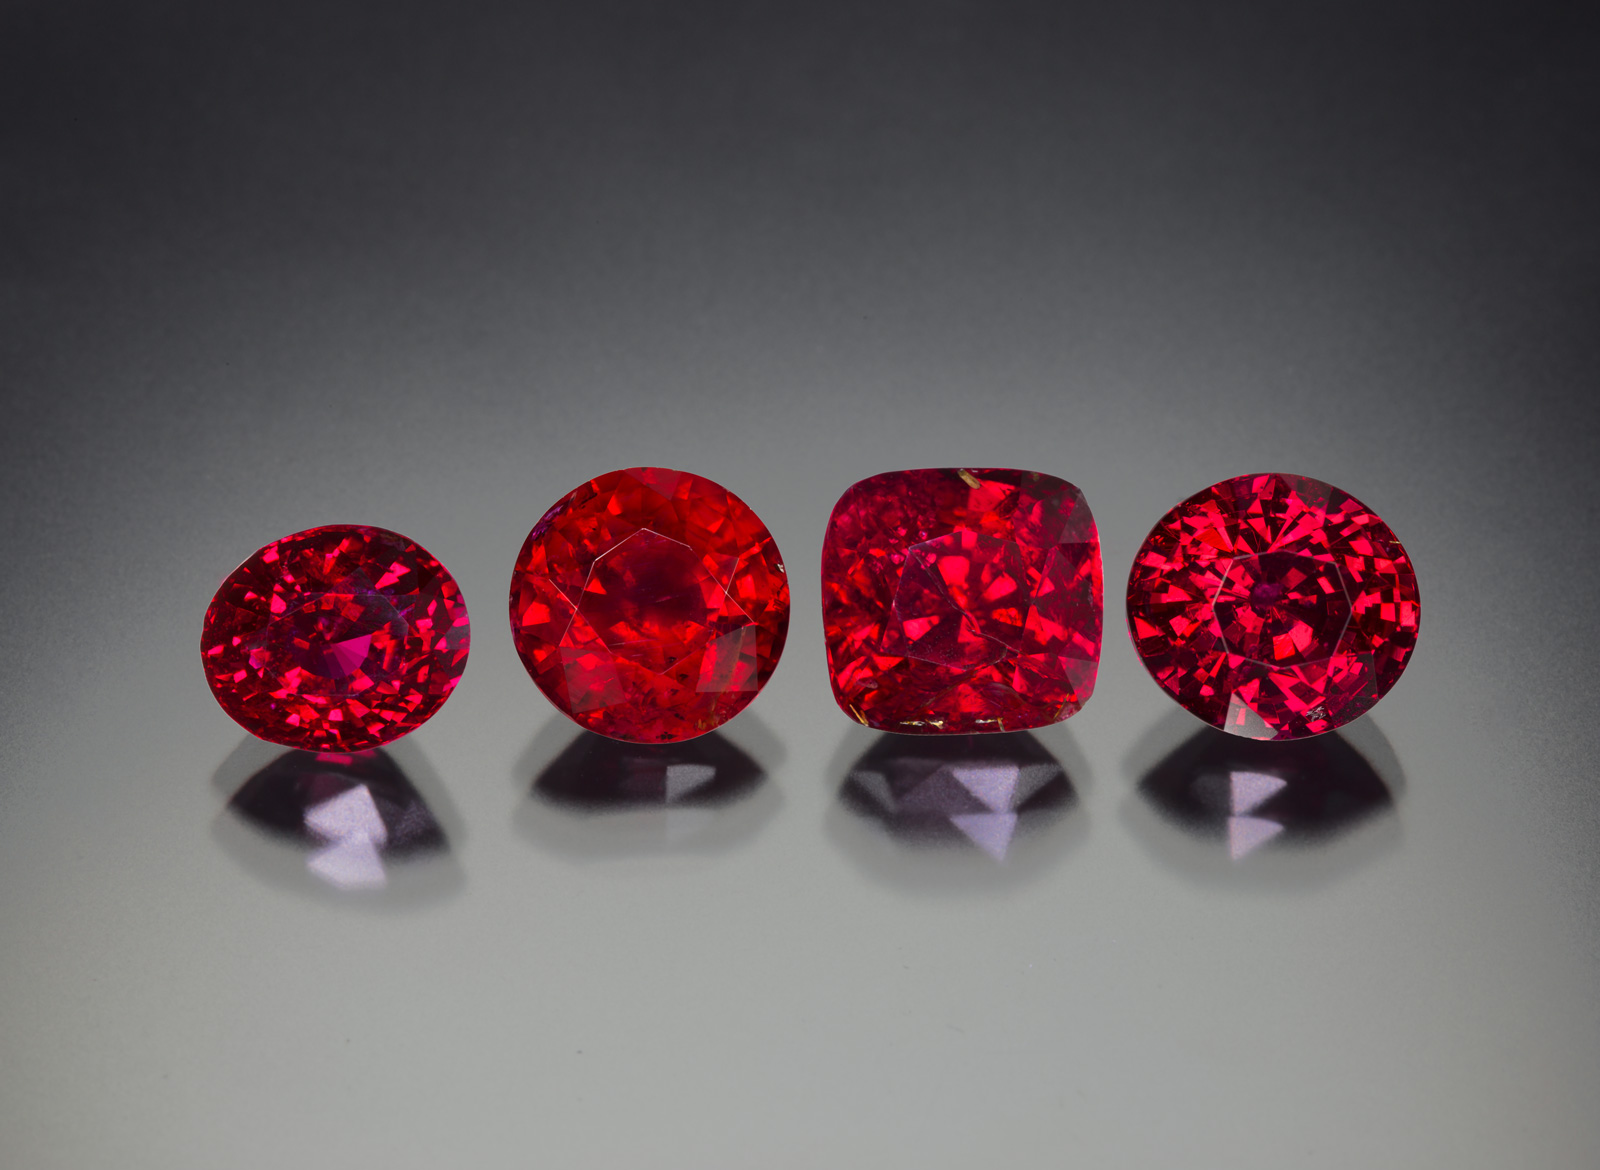 Four untreated rubies from the new find in Madagascar, ranging in size from 4.0 to 6.5 ct. As can be seen, the new production is extremely gemmy. Photo: Wimon Manorotkul/Lotus Gemology.